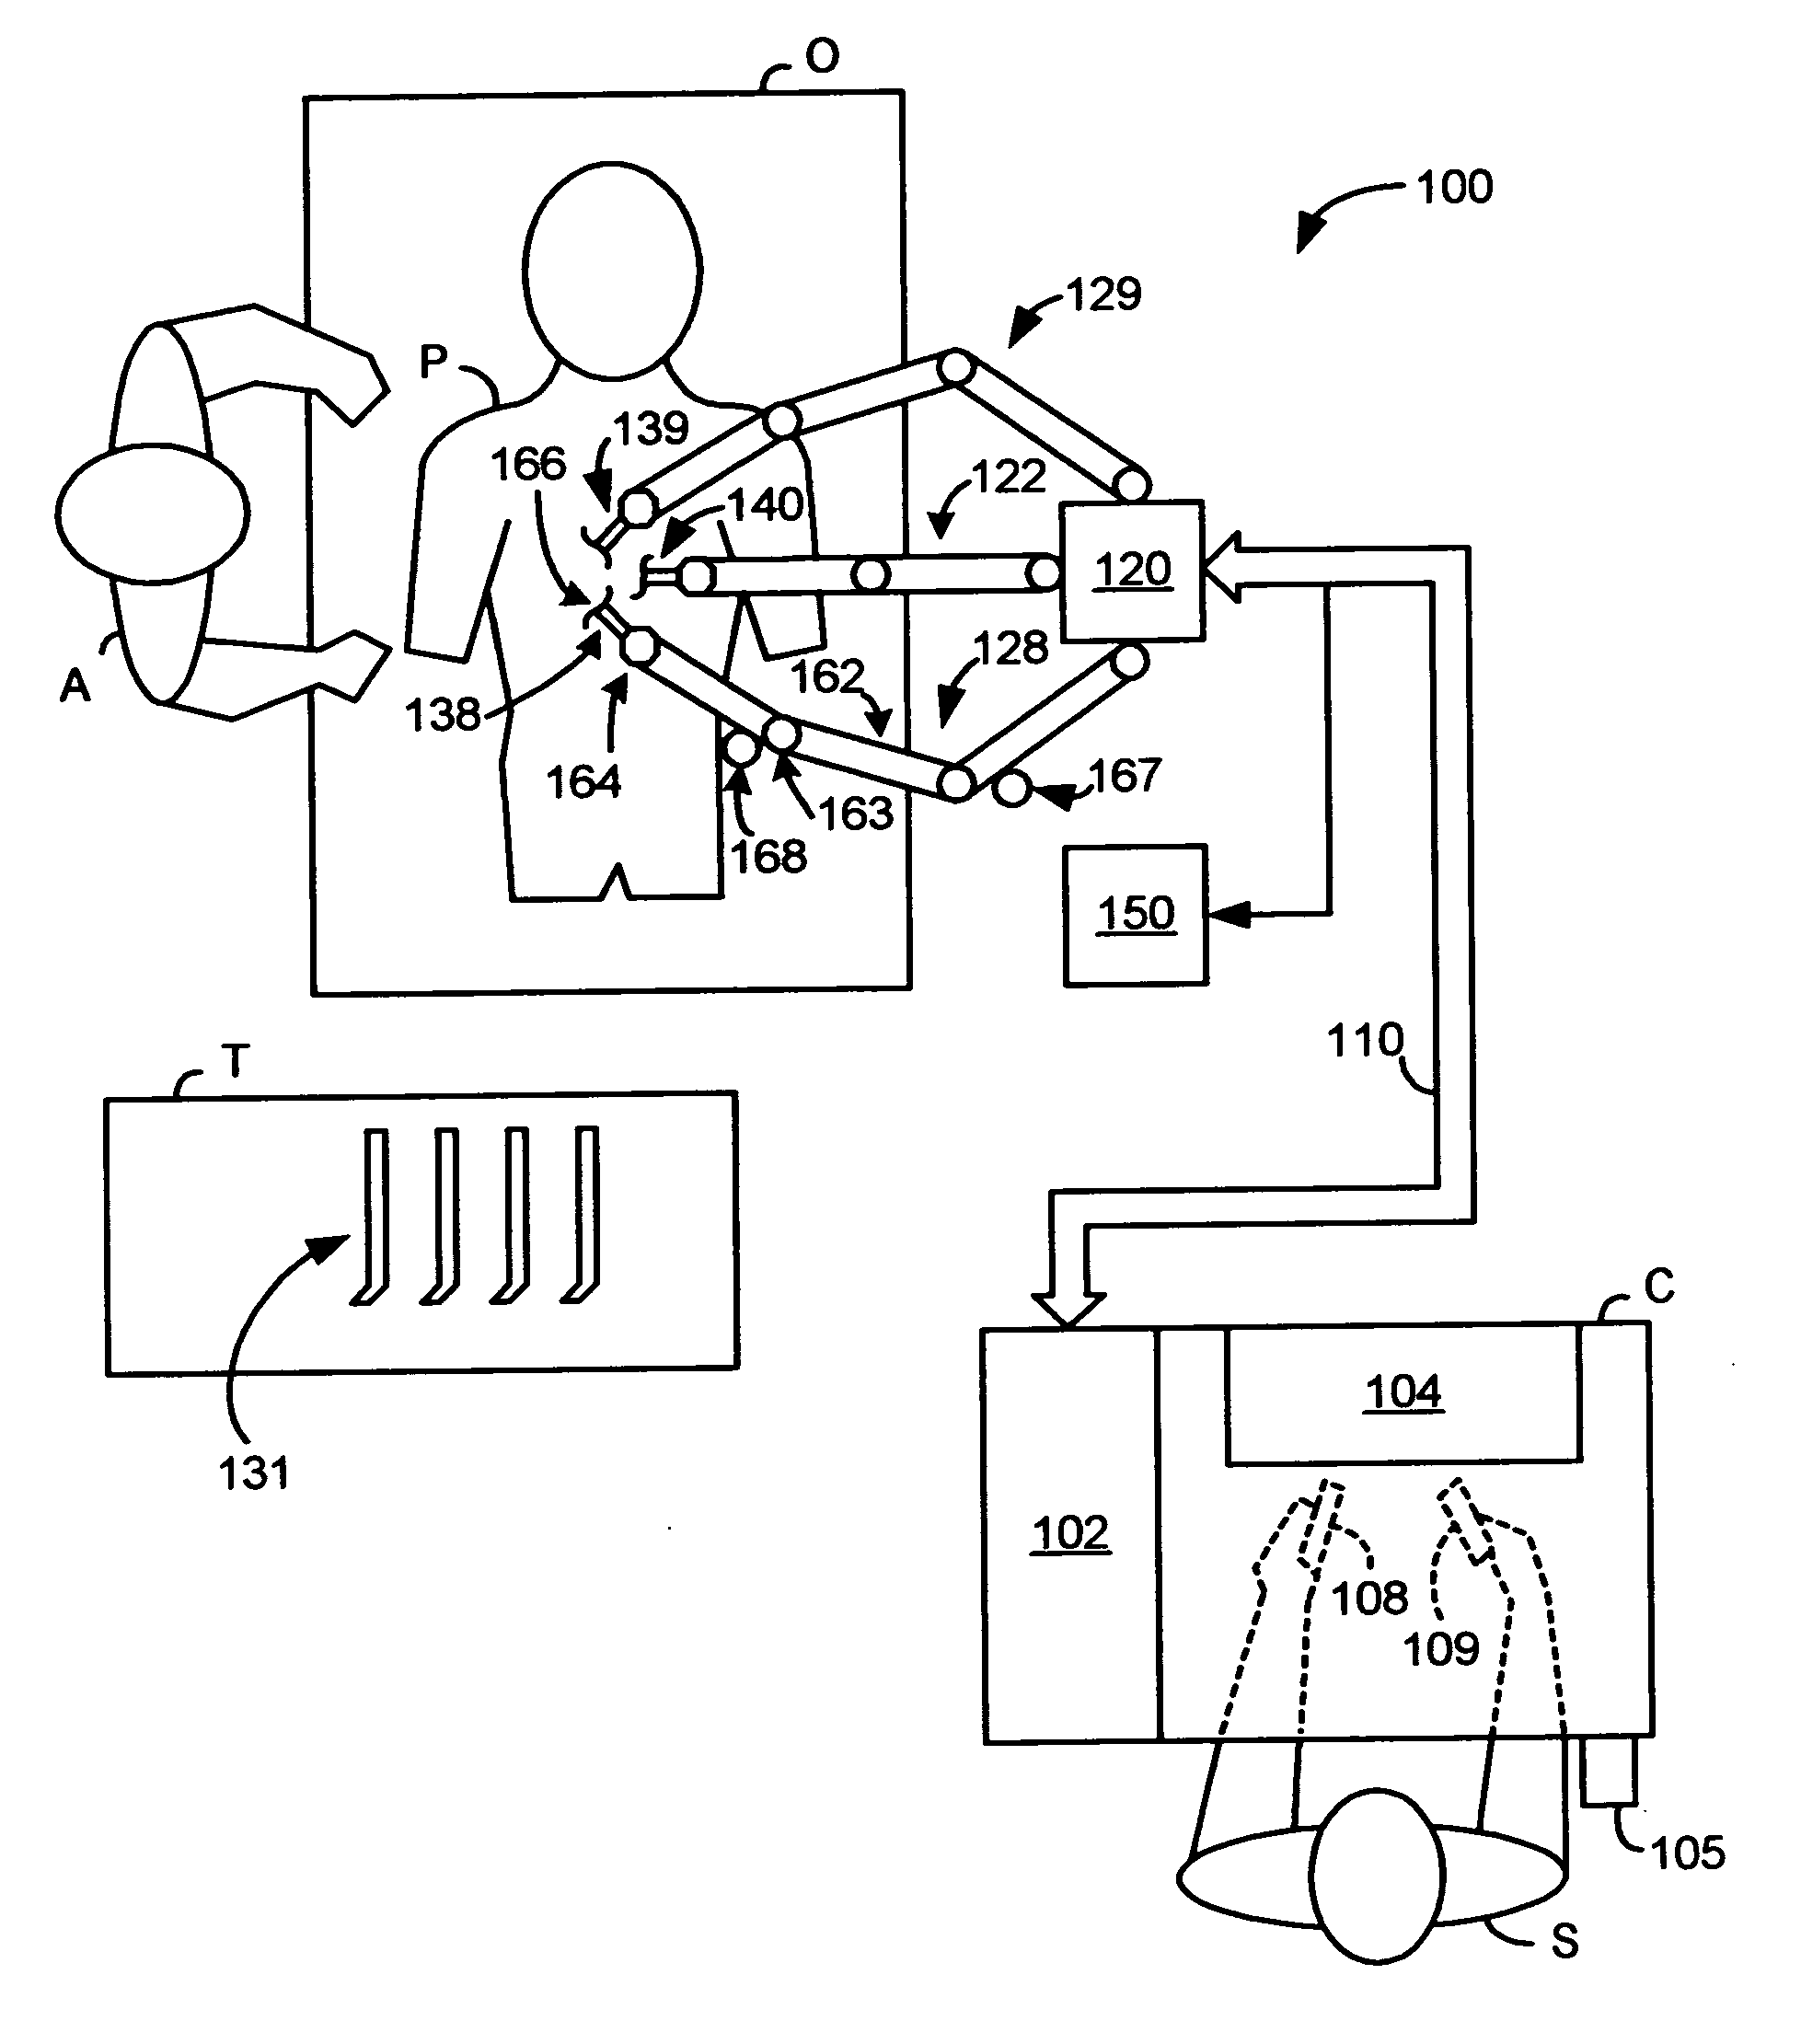 Control system for reducing internally generated frictional and inertial resistance to manual positioning of a surgical manipulator